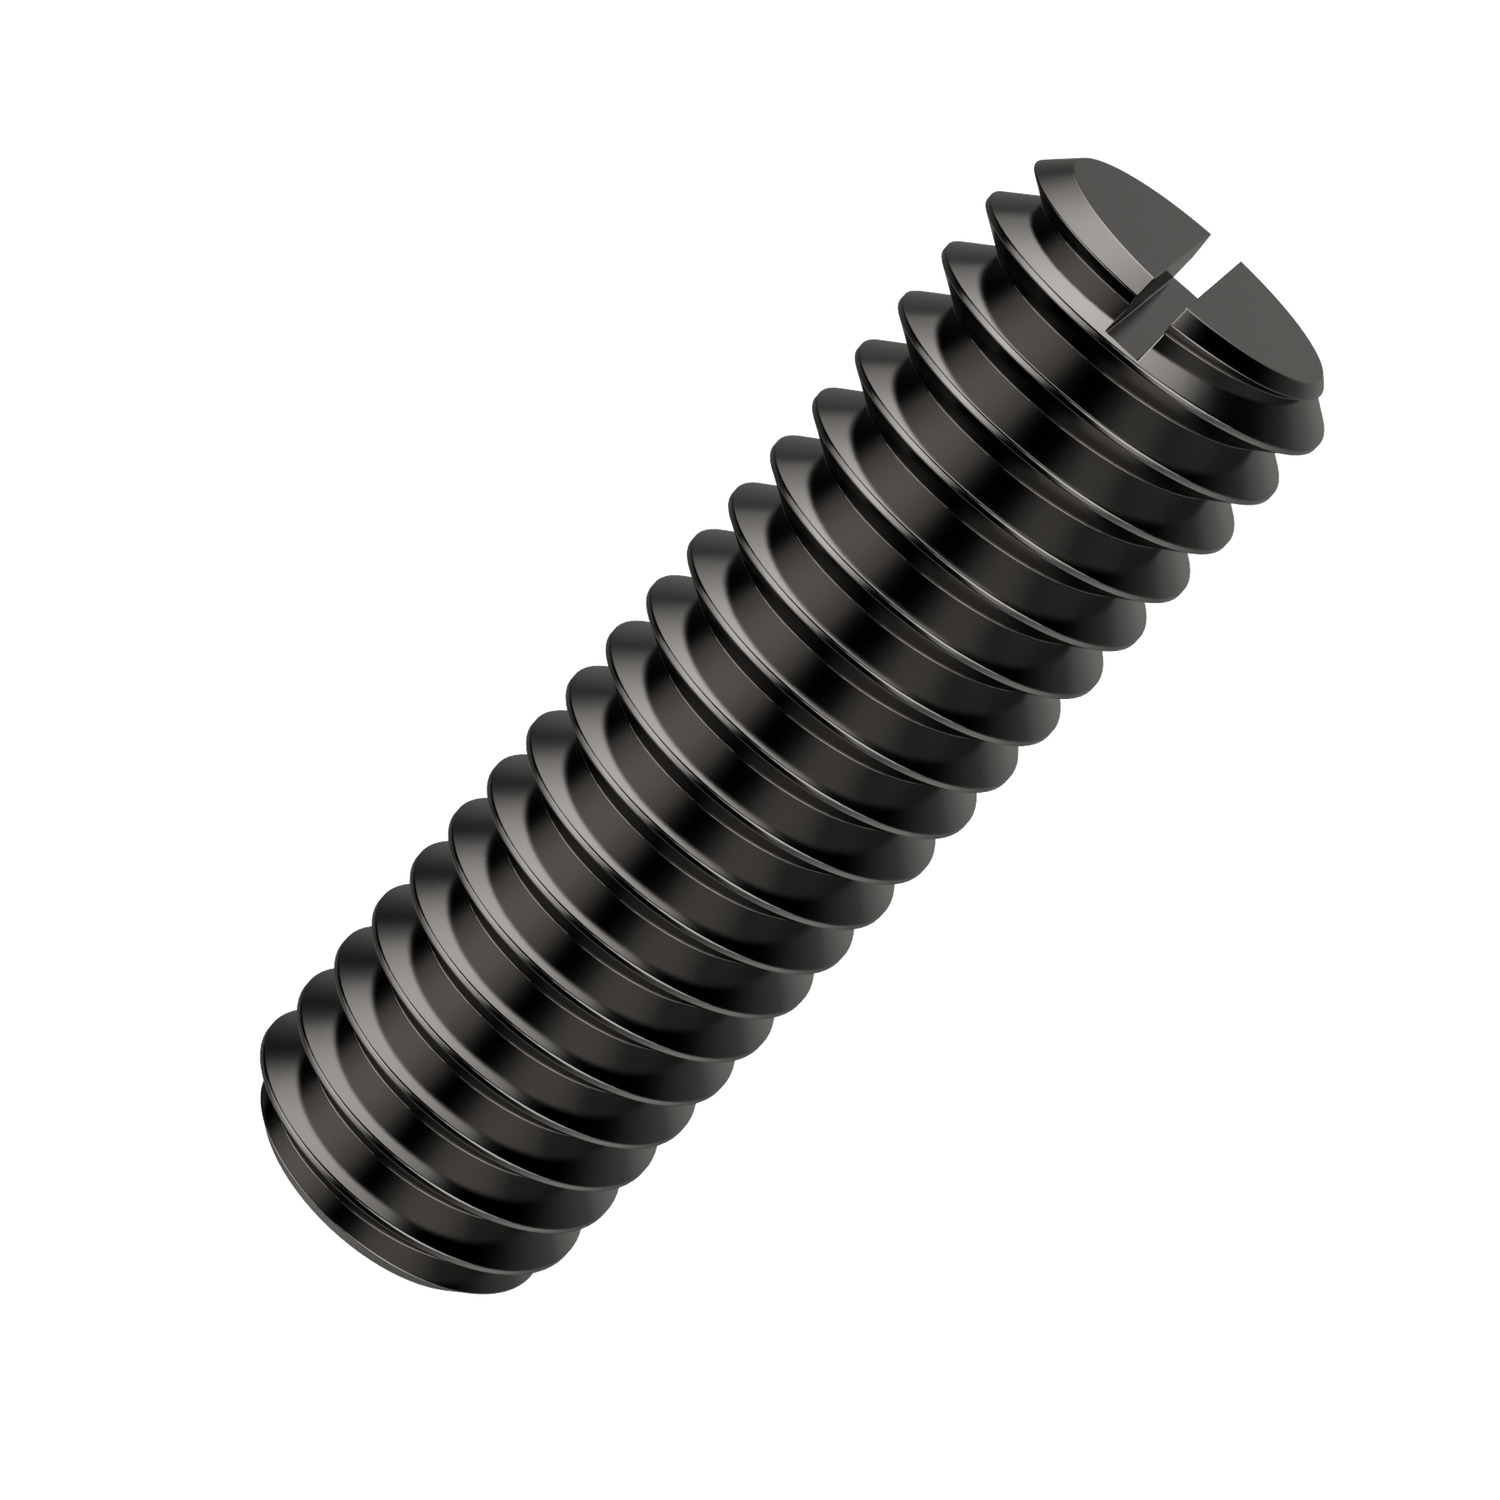 34300.W0120 Threaded rod - WHILE STOCKS LAST! M12 - 30. Please note, supplied in multiples of 10  WHILE STOCKS LAST!